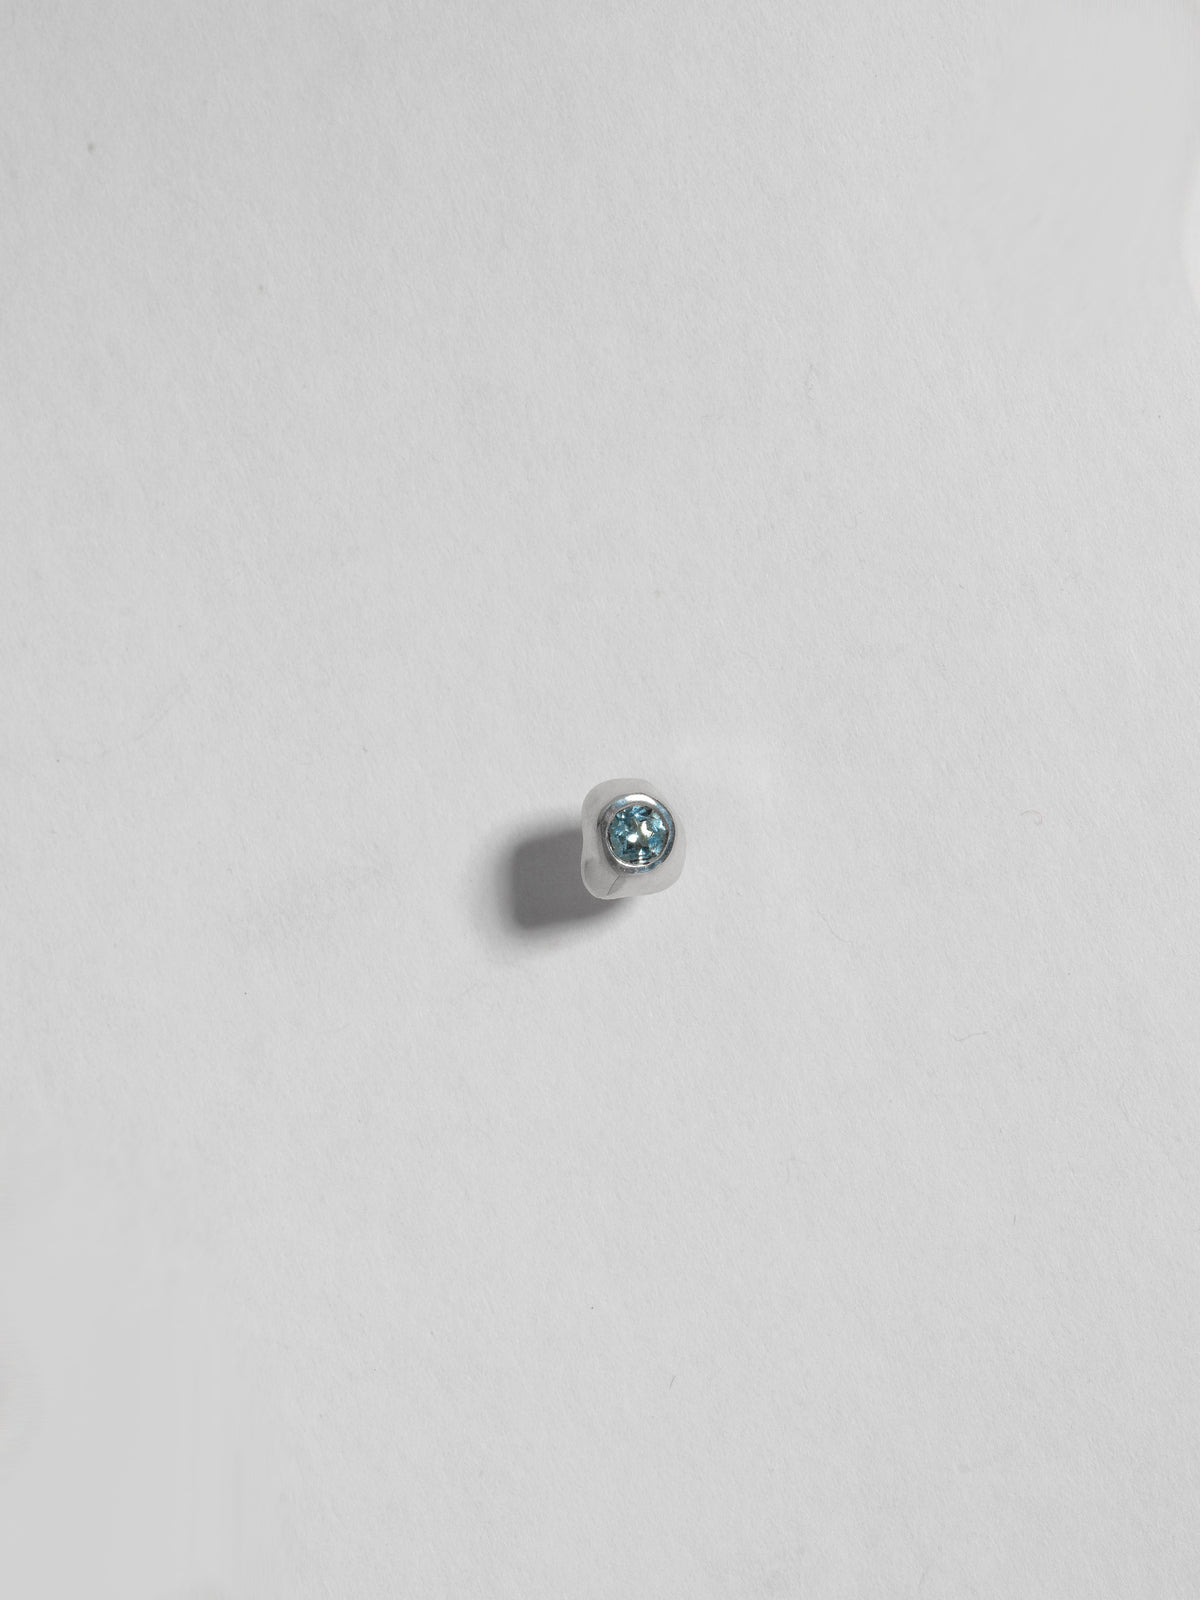 Close up product image of FARIS KIRA Stud in sterling silver with topaz, shown on white background (front view)